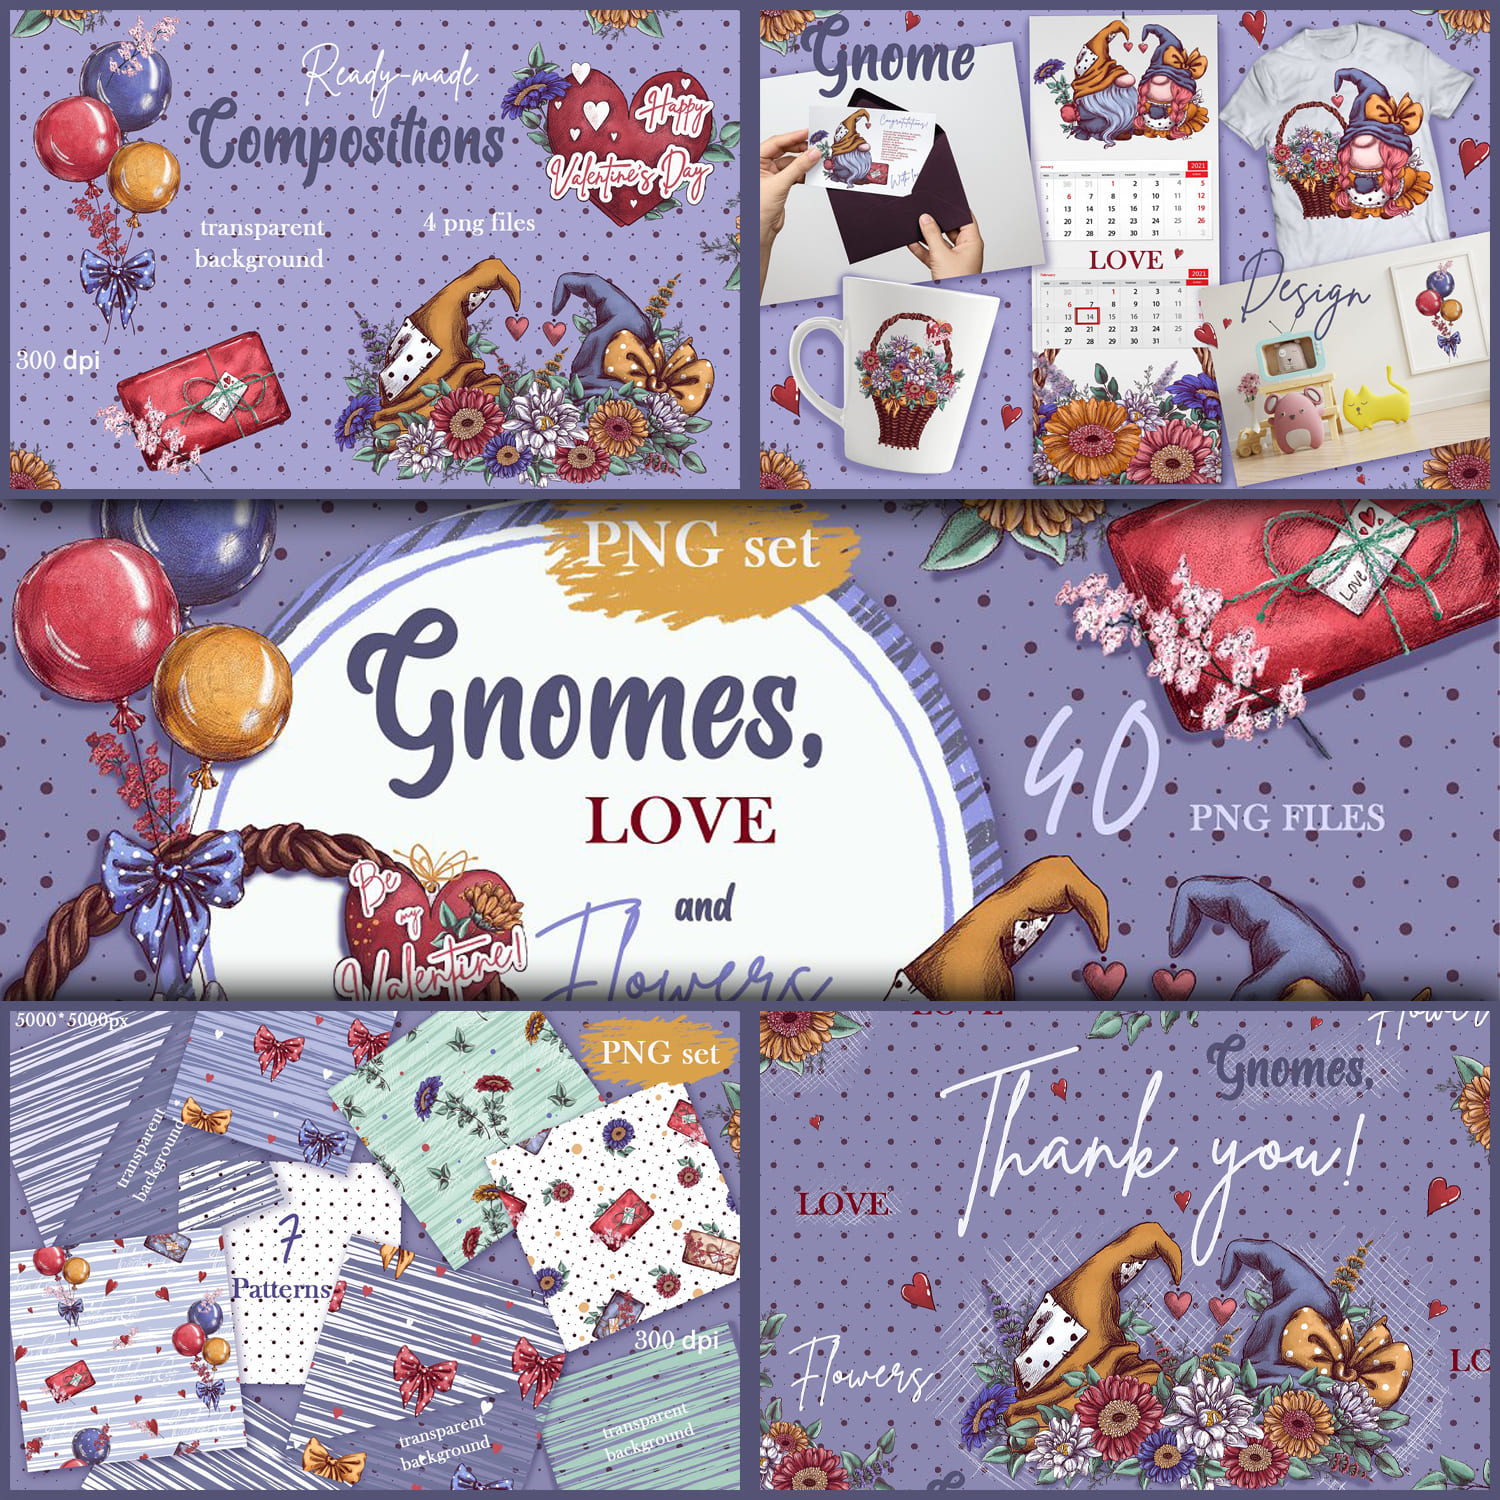 Cute characters of Gnomes, Love and Flowers.